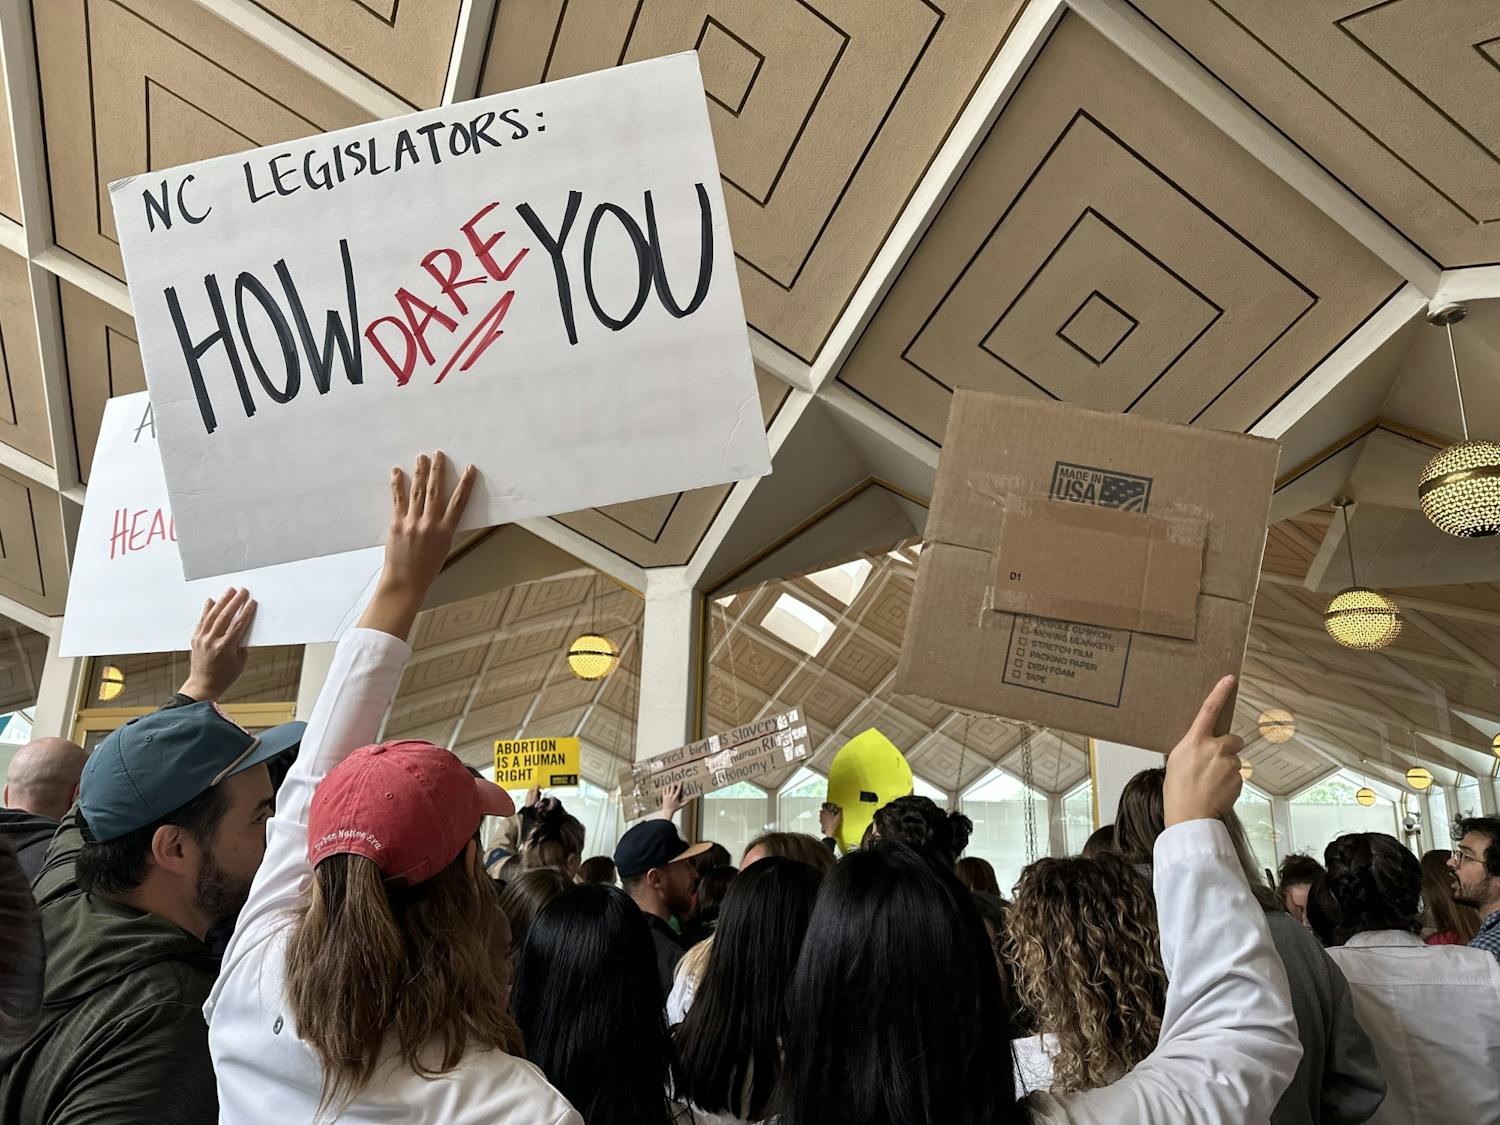 Protesters gather on the third floor of the Legislative Building on May 3, 2023, to protest a new anti-abortion bill introduced in the N.C. General Assembly.